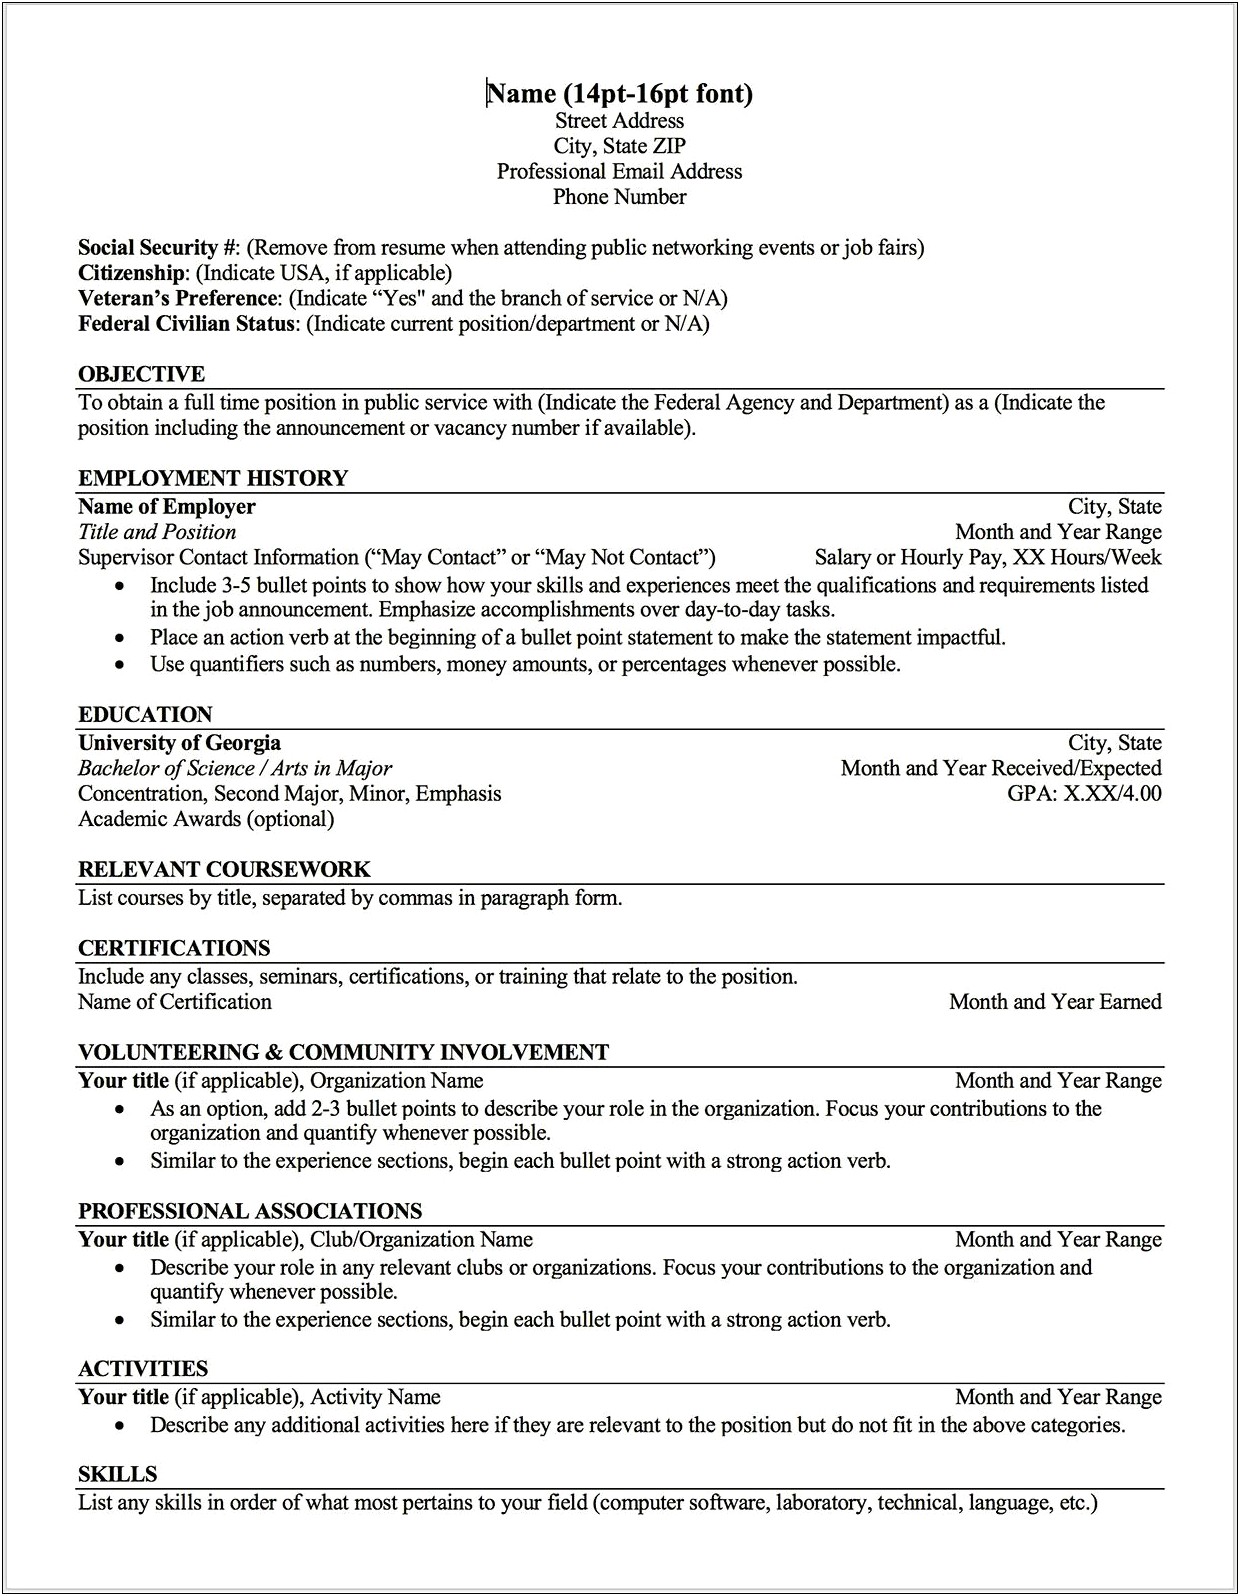 Samples For Resume For Faderal Jobs